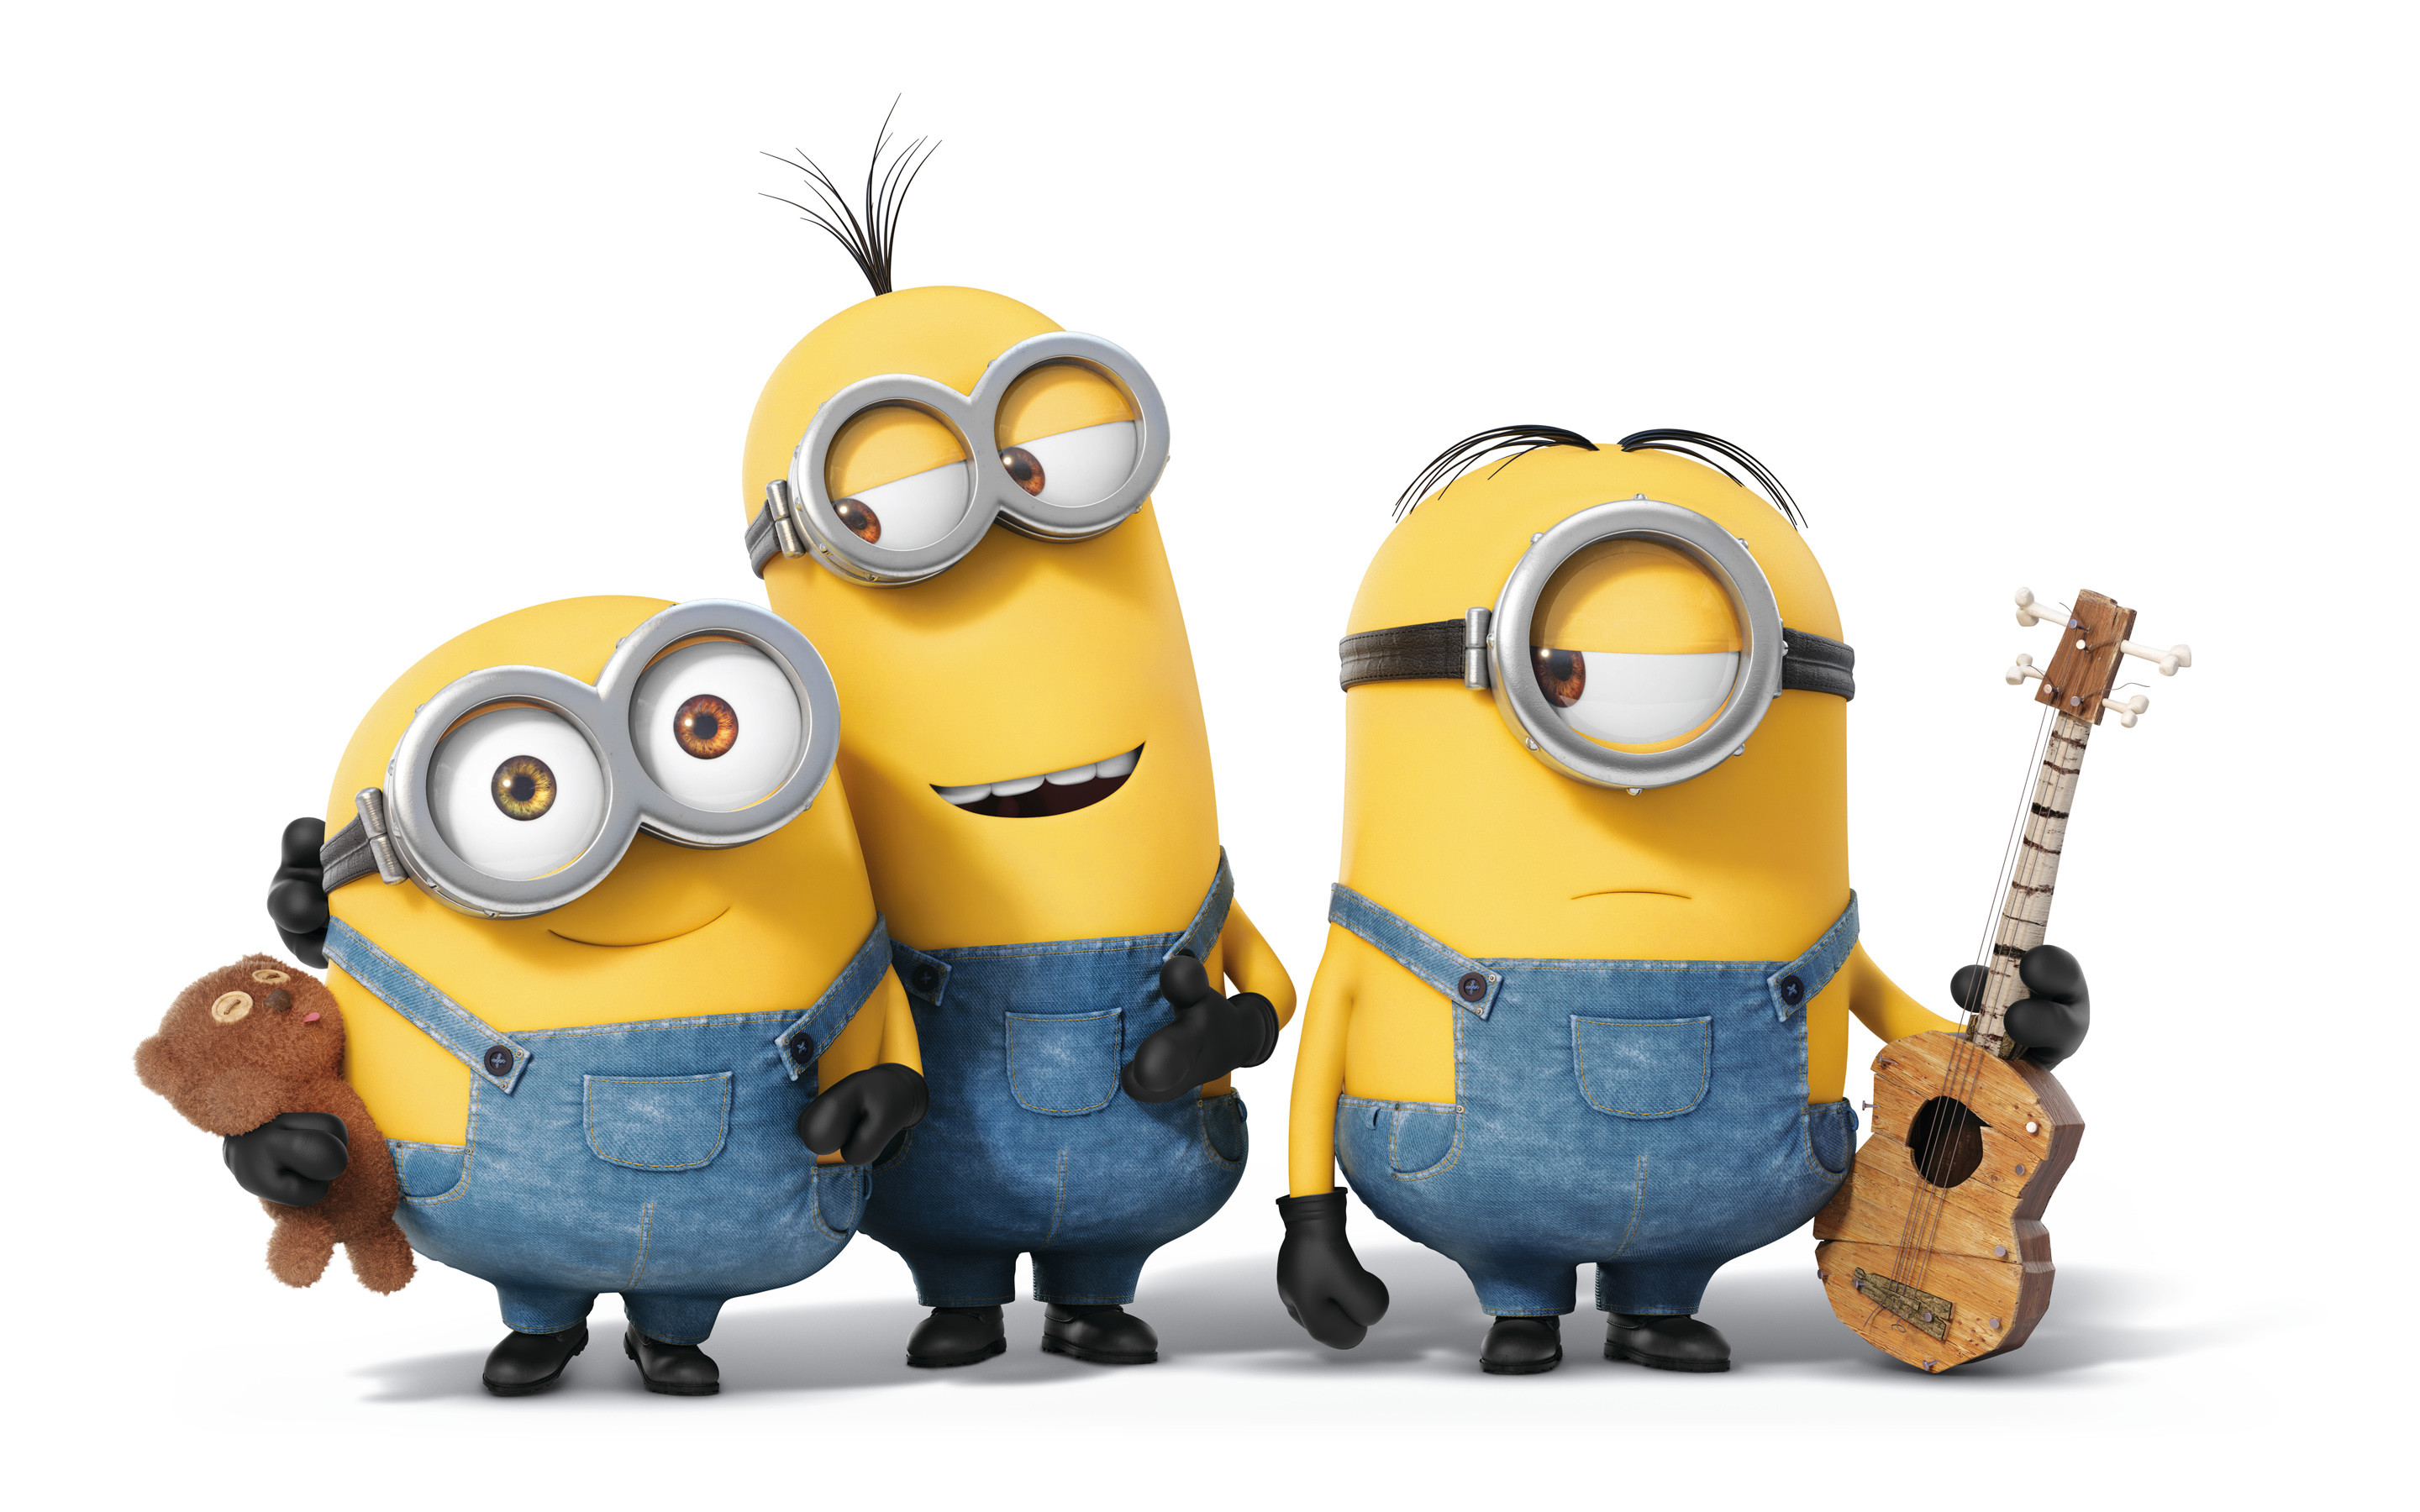 2880x1800 Minions wallpapers high quality free